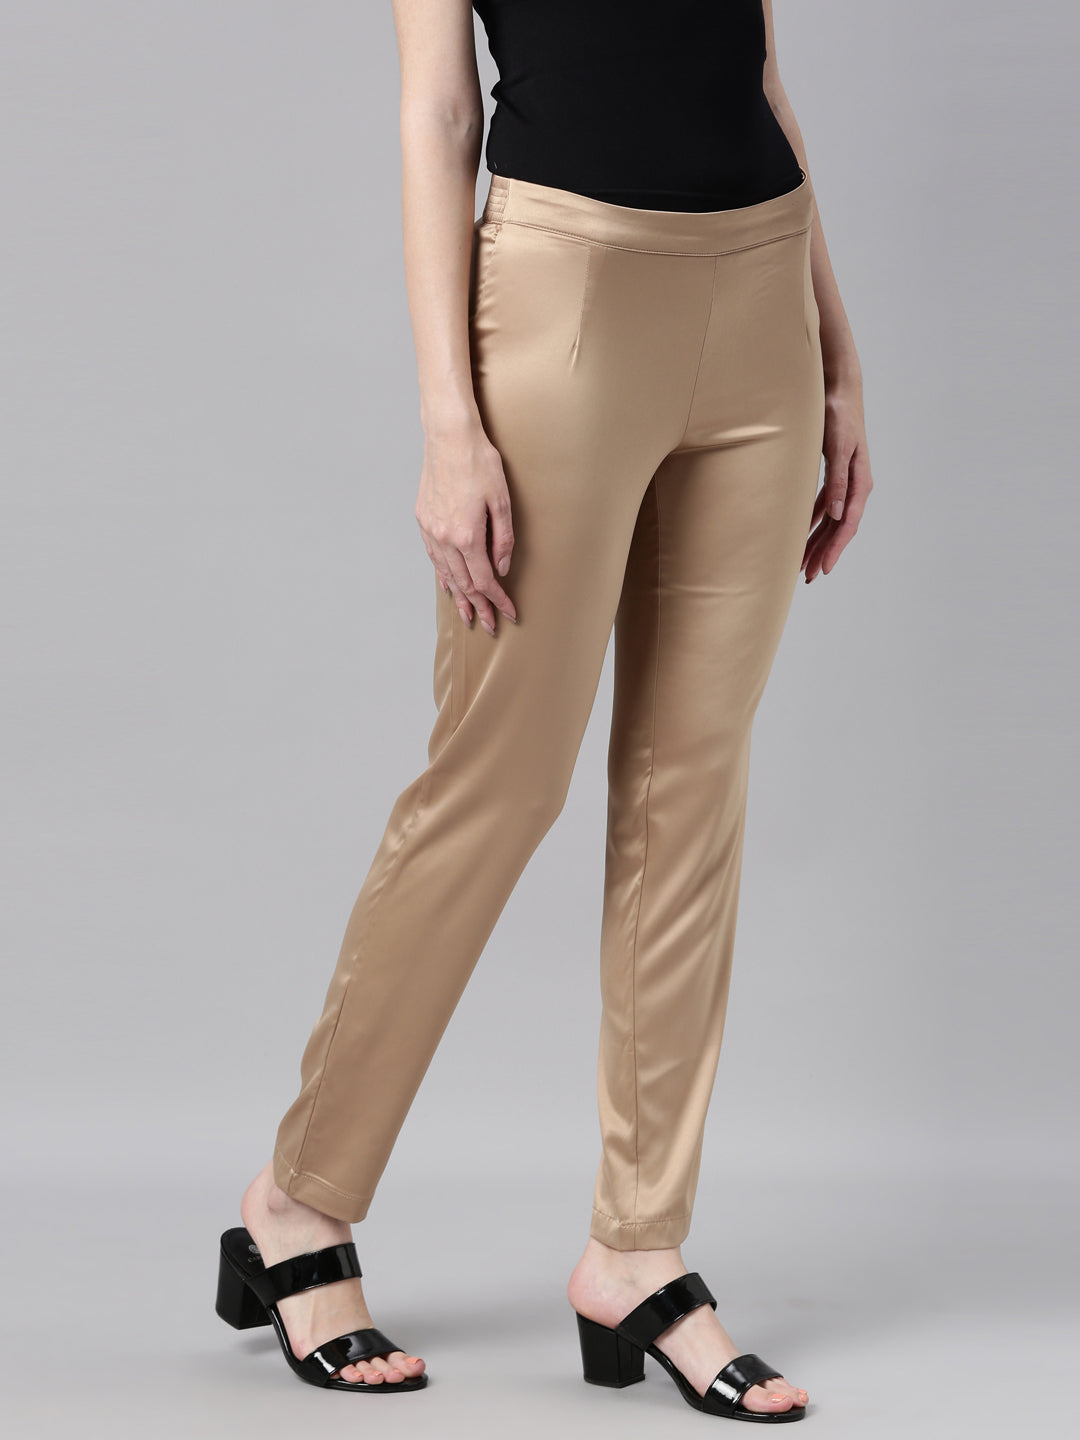 Go Colors Ethnic Bottoms : Go Colors Dark Pink Shiny Pants Online | Nykaa  Fashion